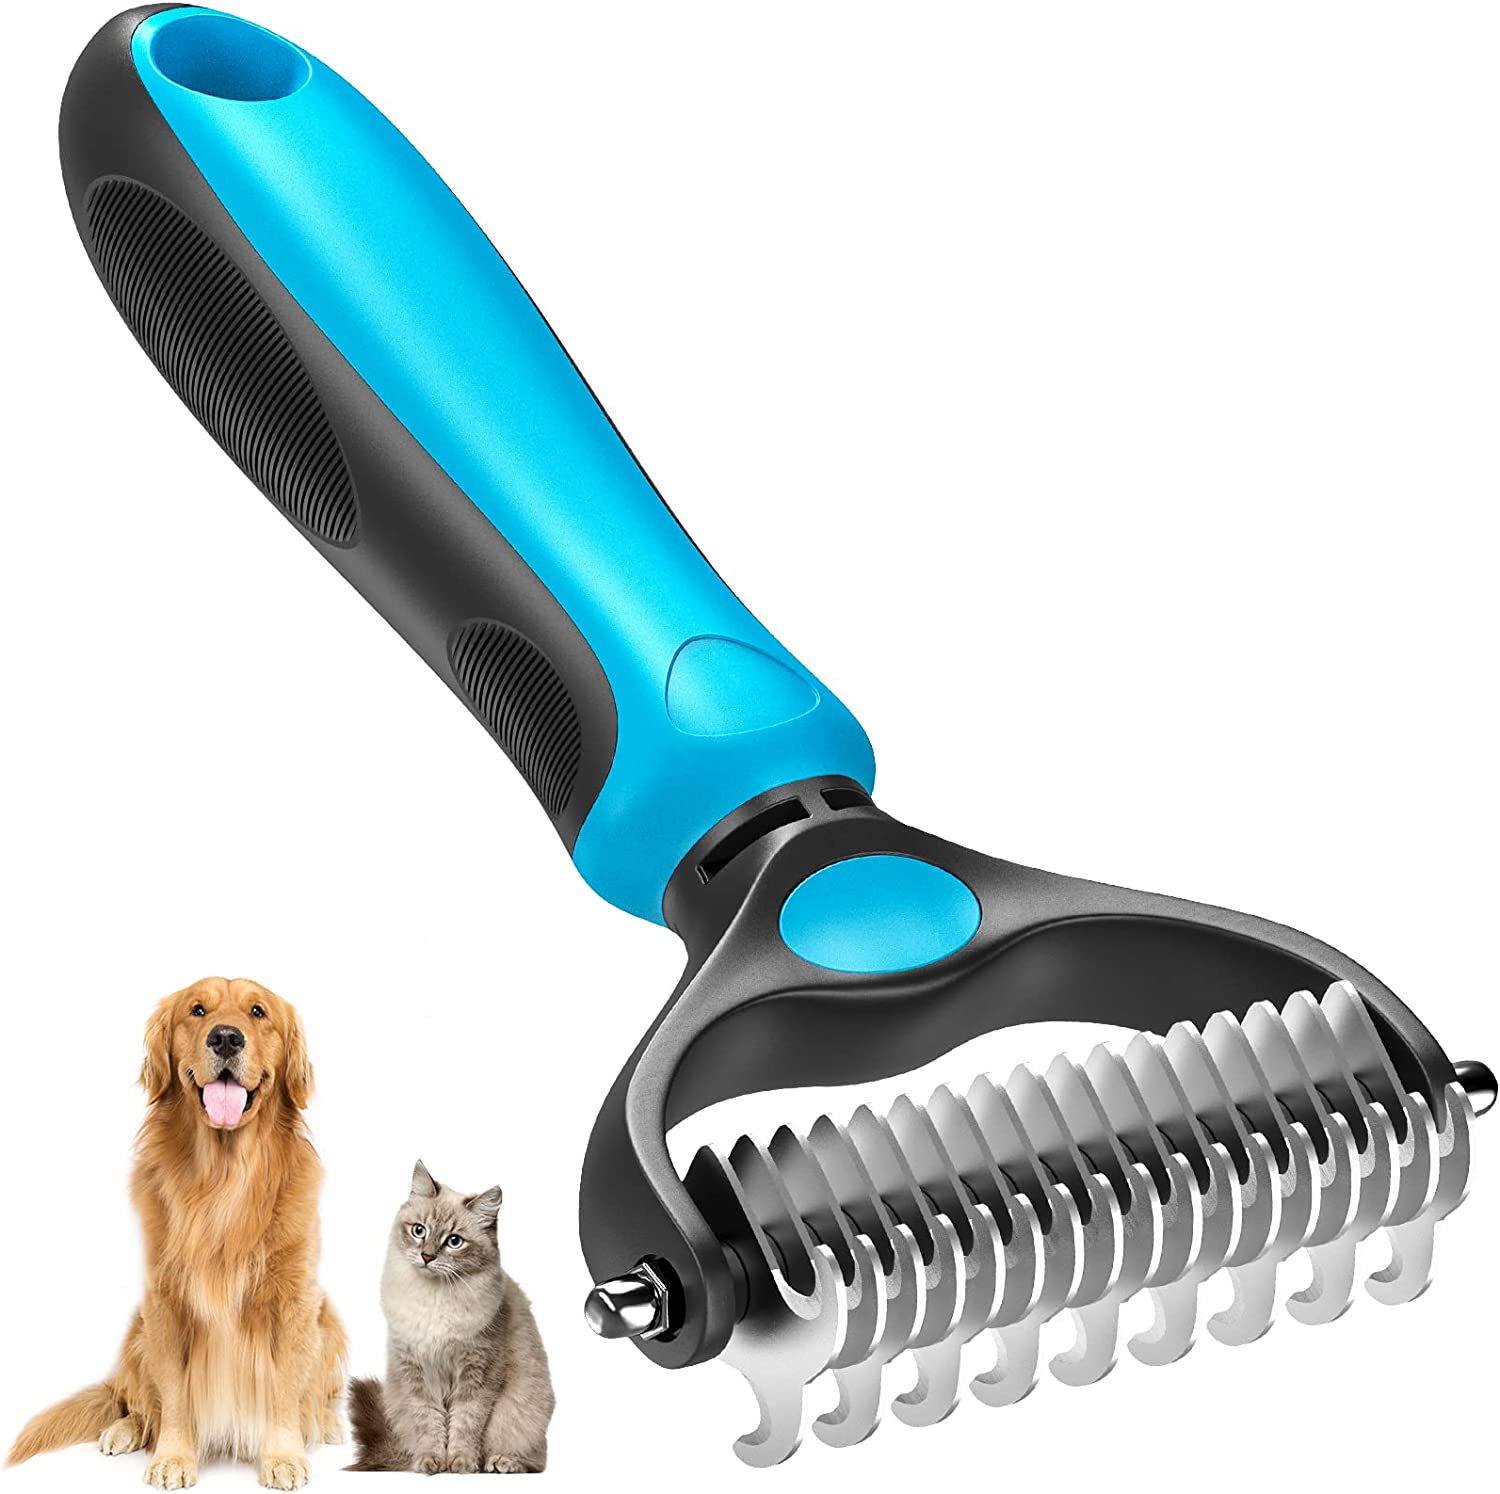 Double Sided Shedding and Dematting Comb for Dogs and Cats - BSZ Pet Care